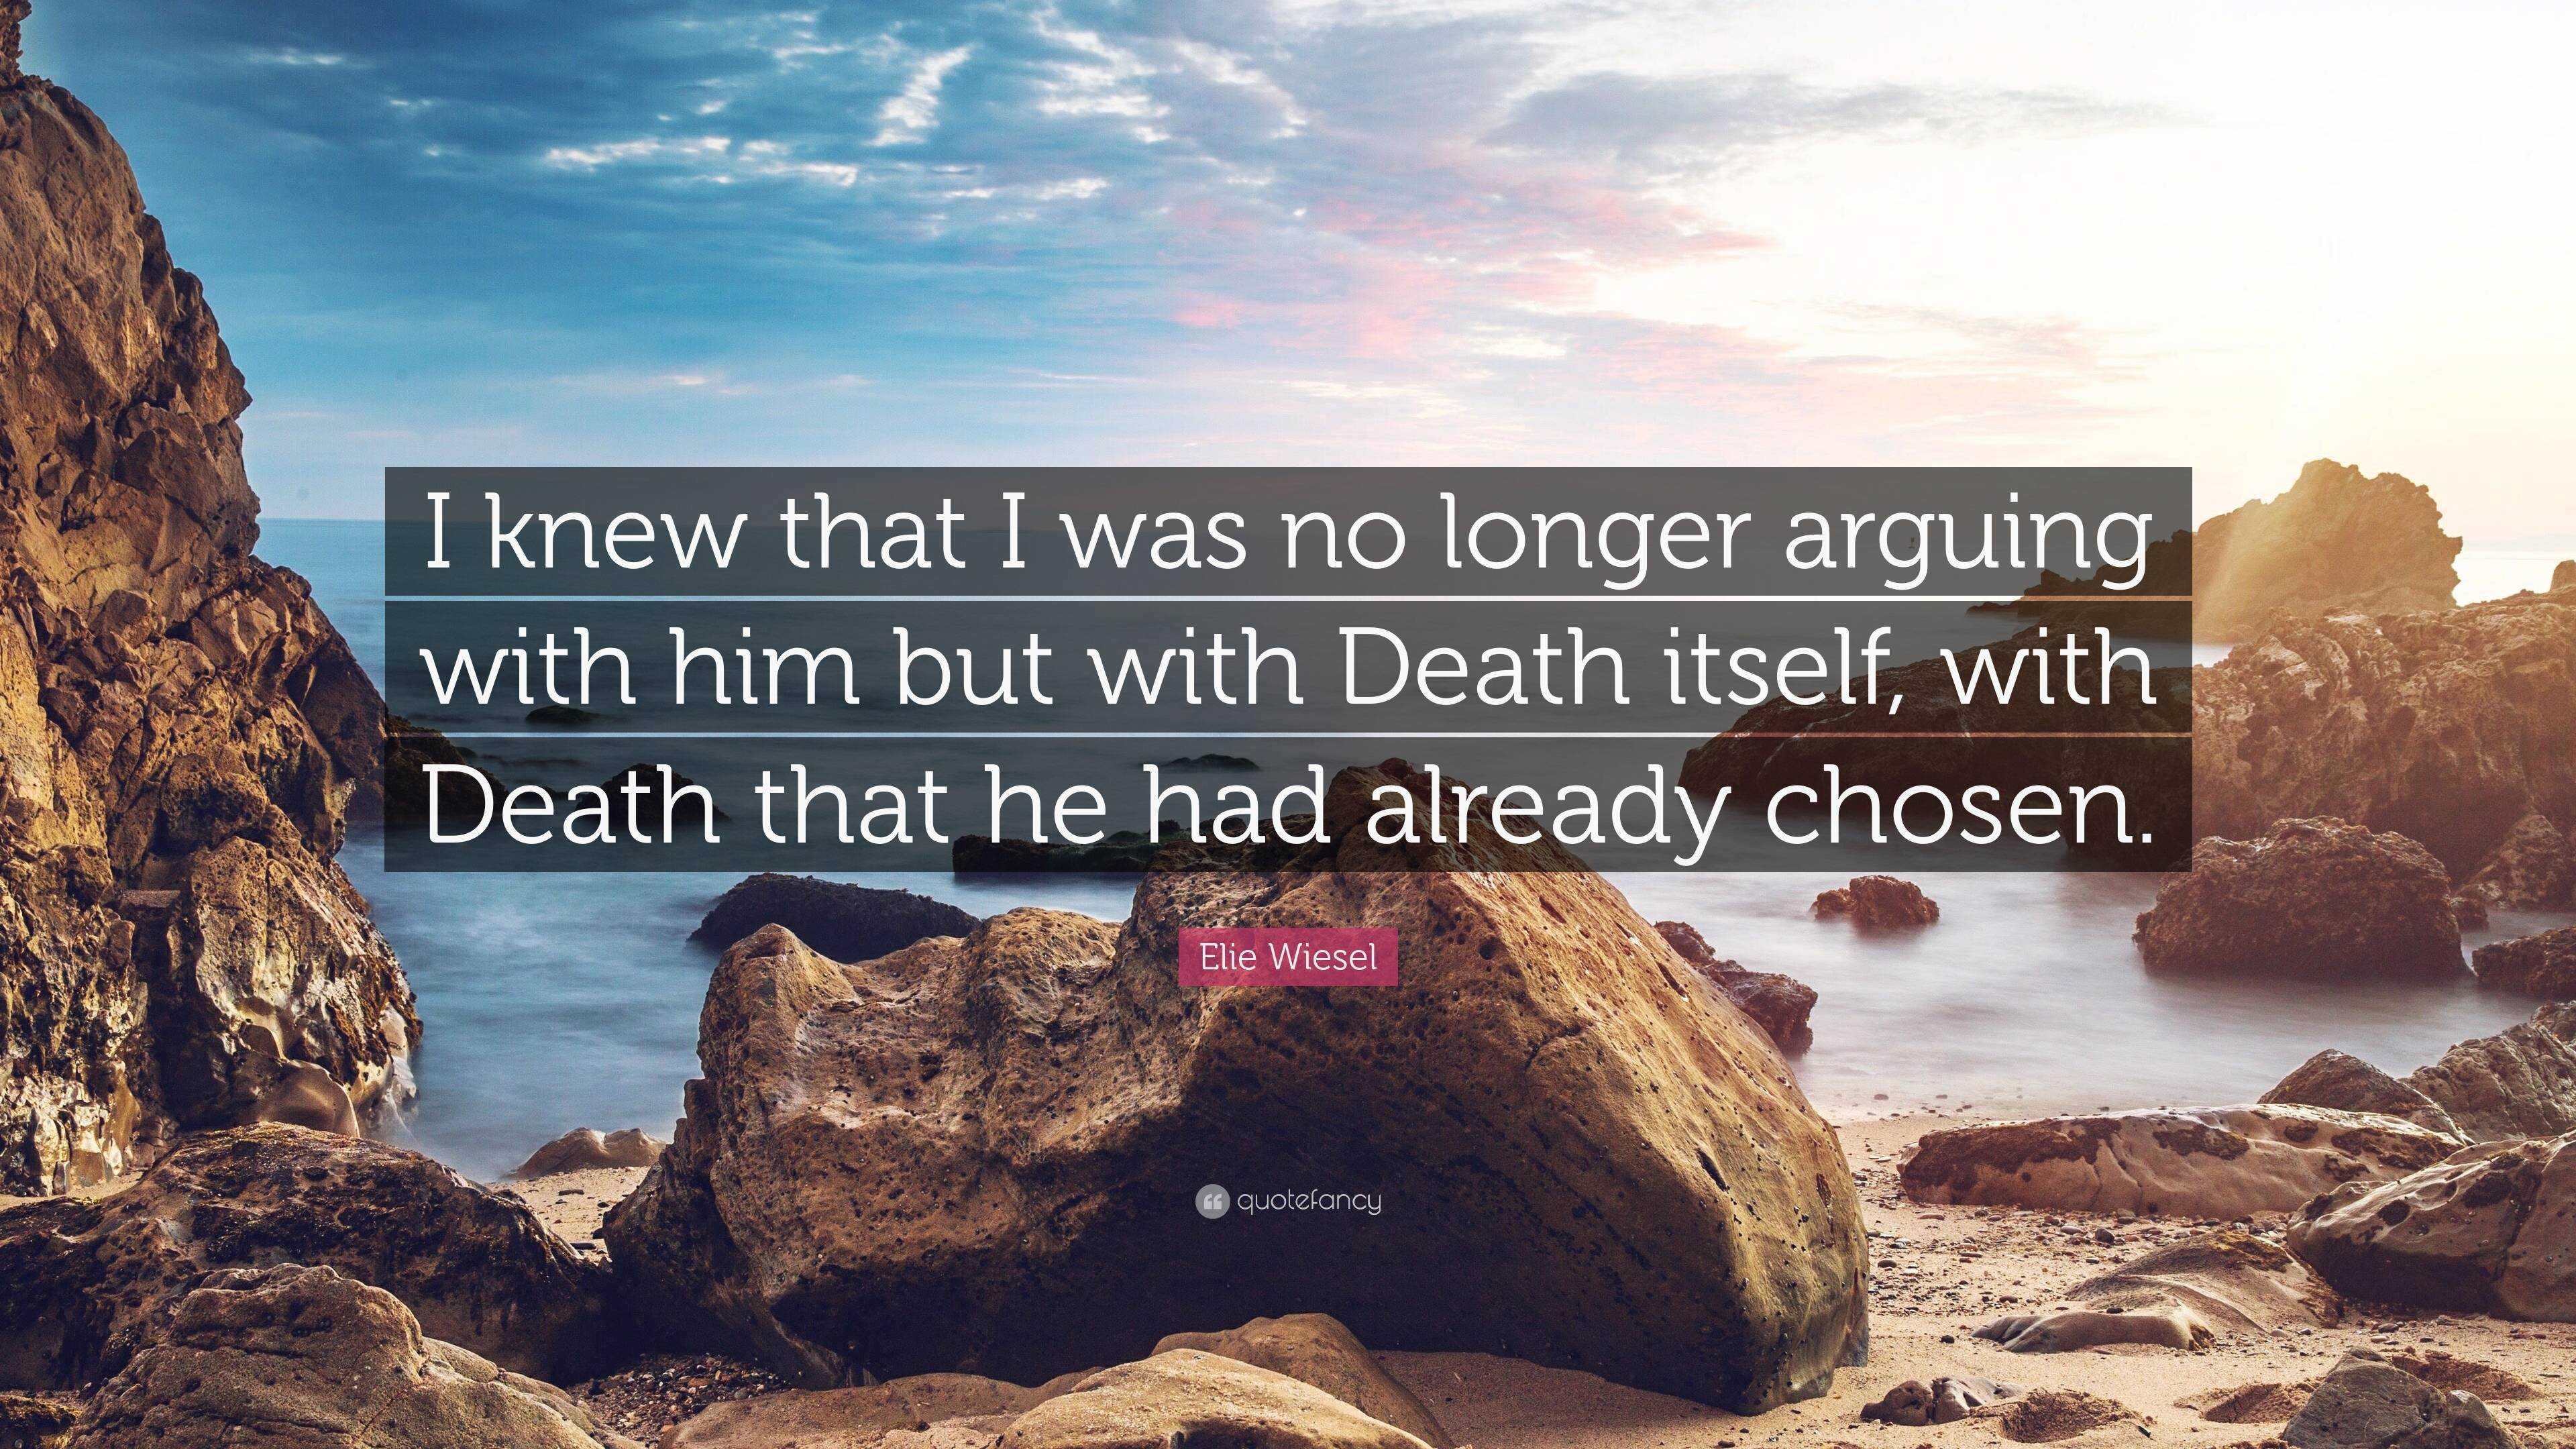 Elie Wiesel Quote: “I knew that I was no longer arguing with him but ...